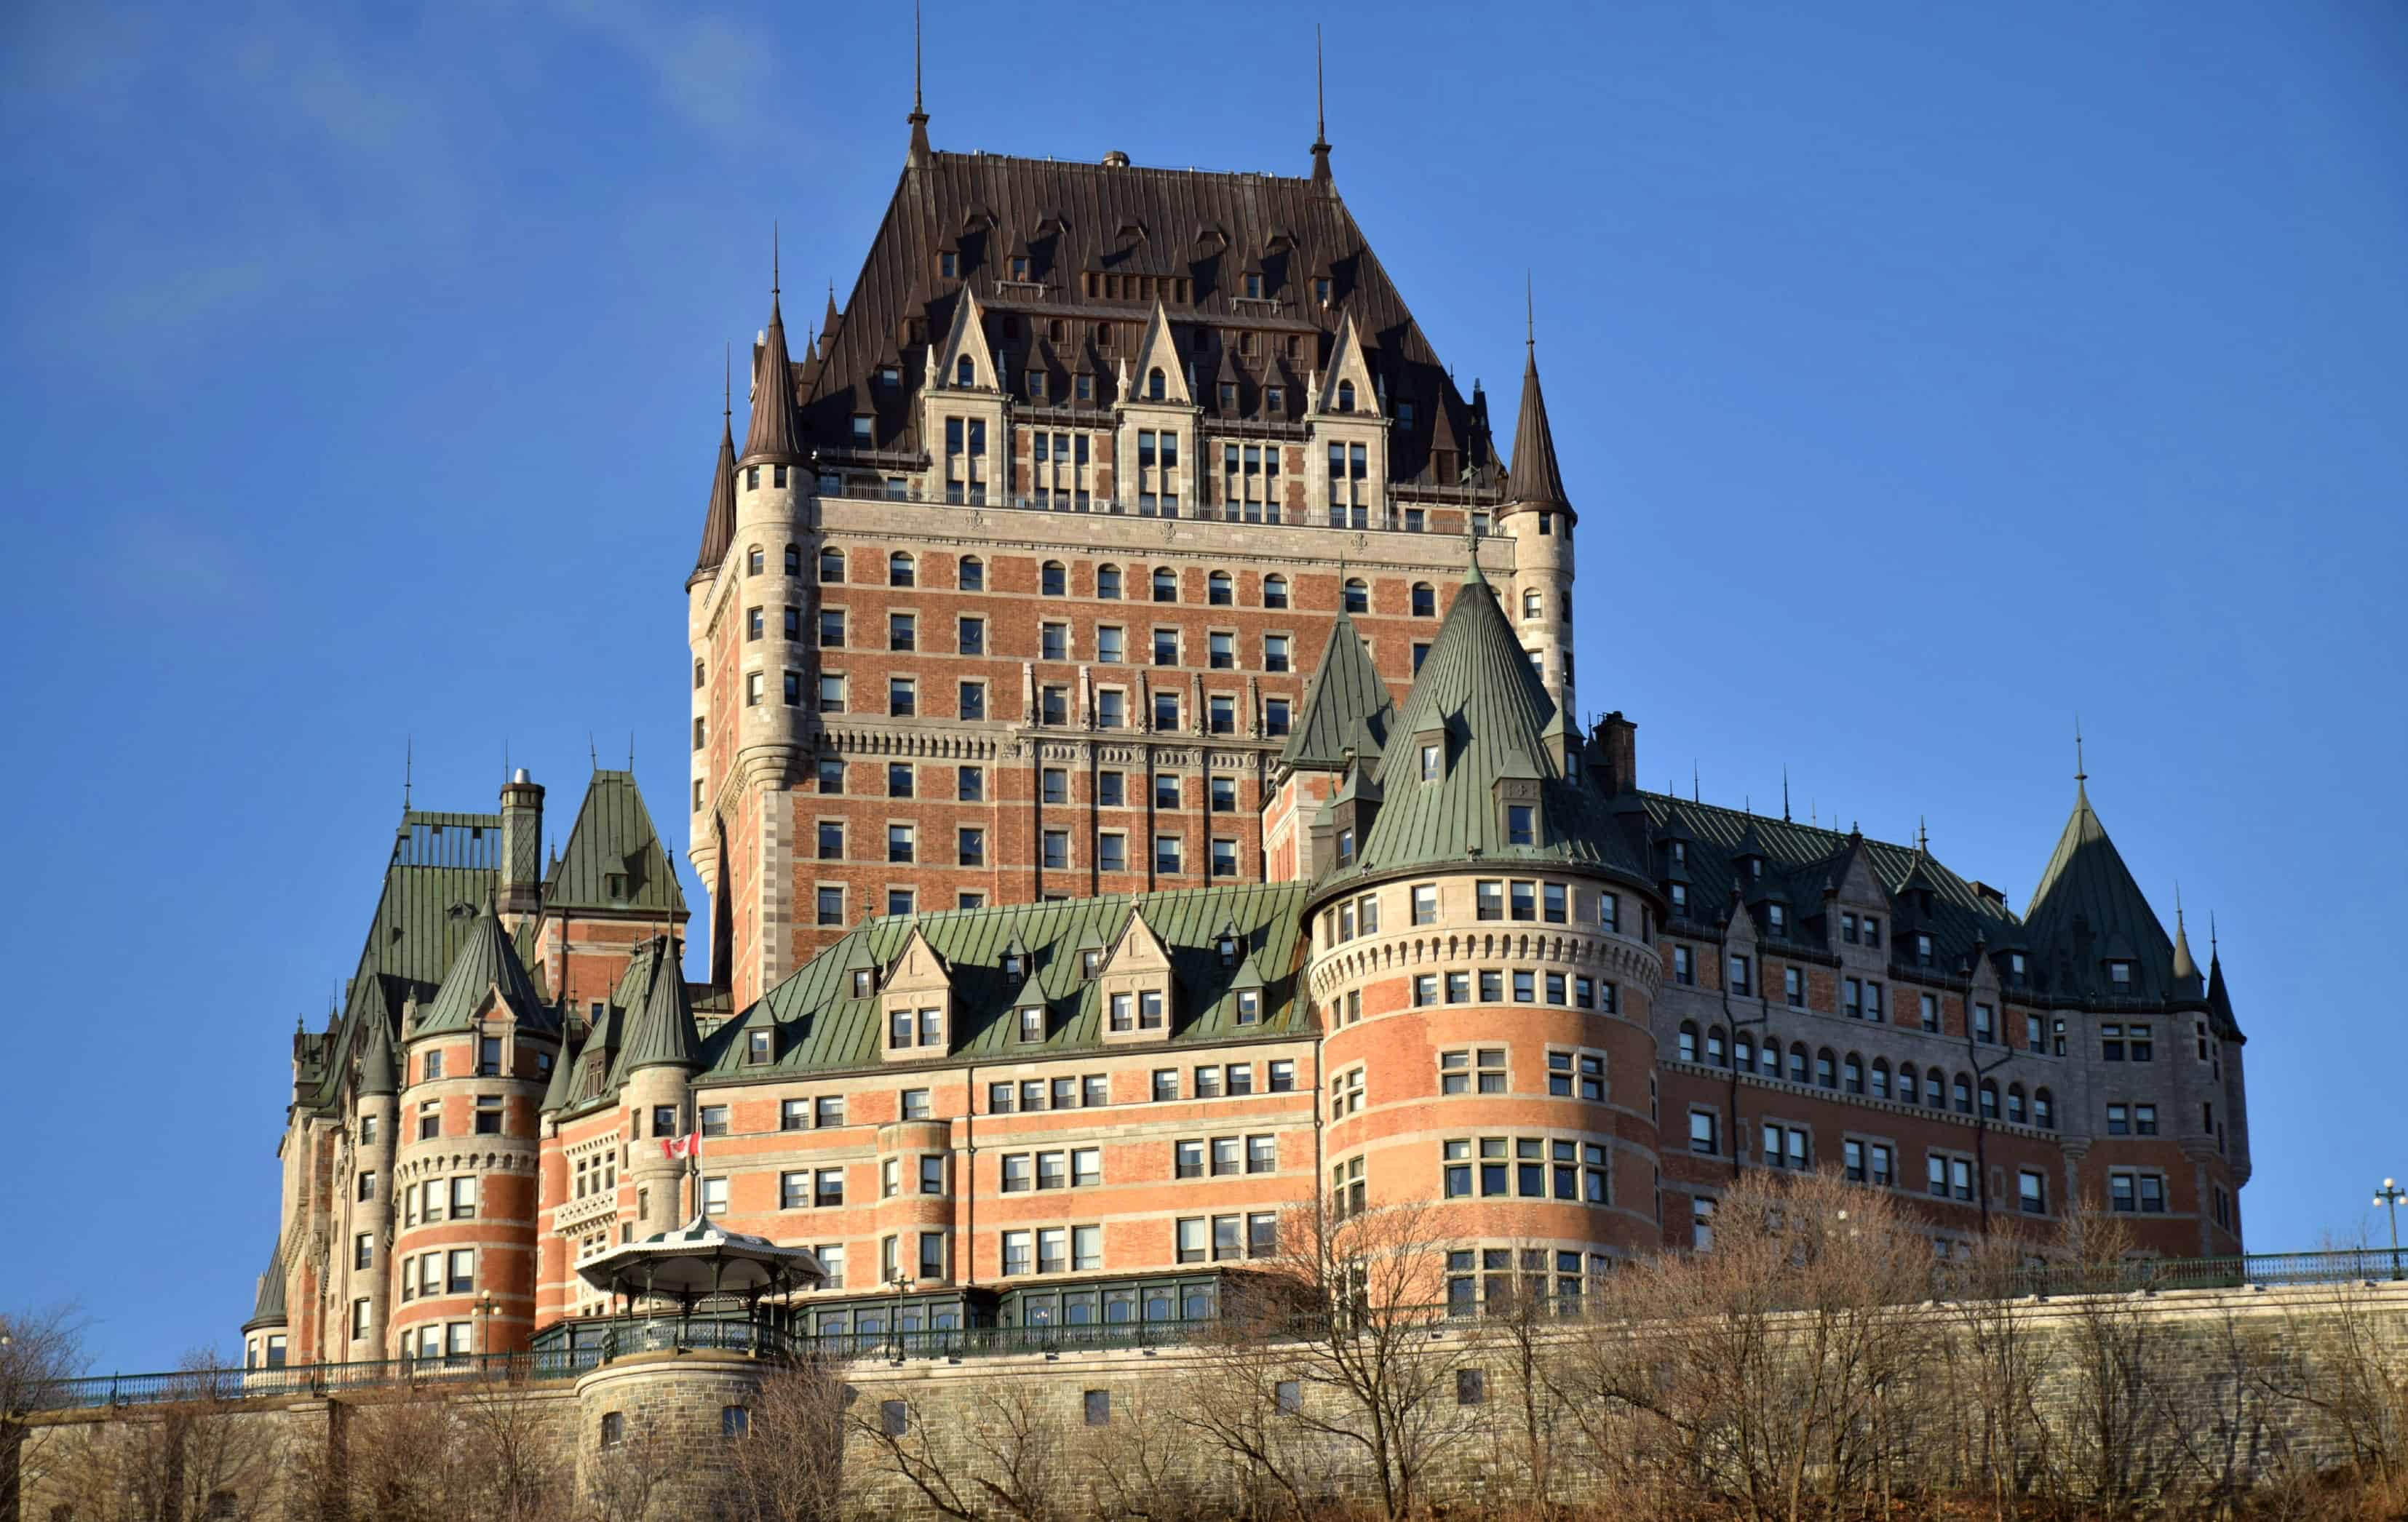 A visit to the Chateau Frontenac is one of the best things to do in Quebec City